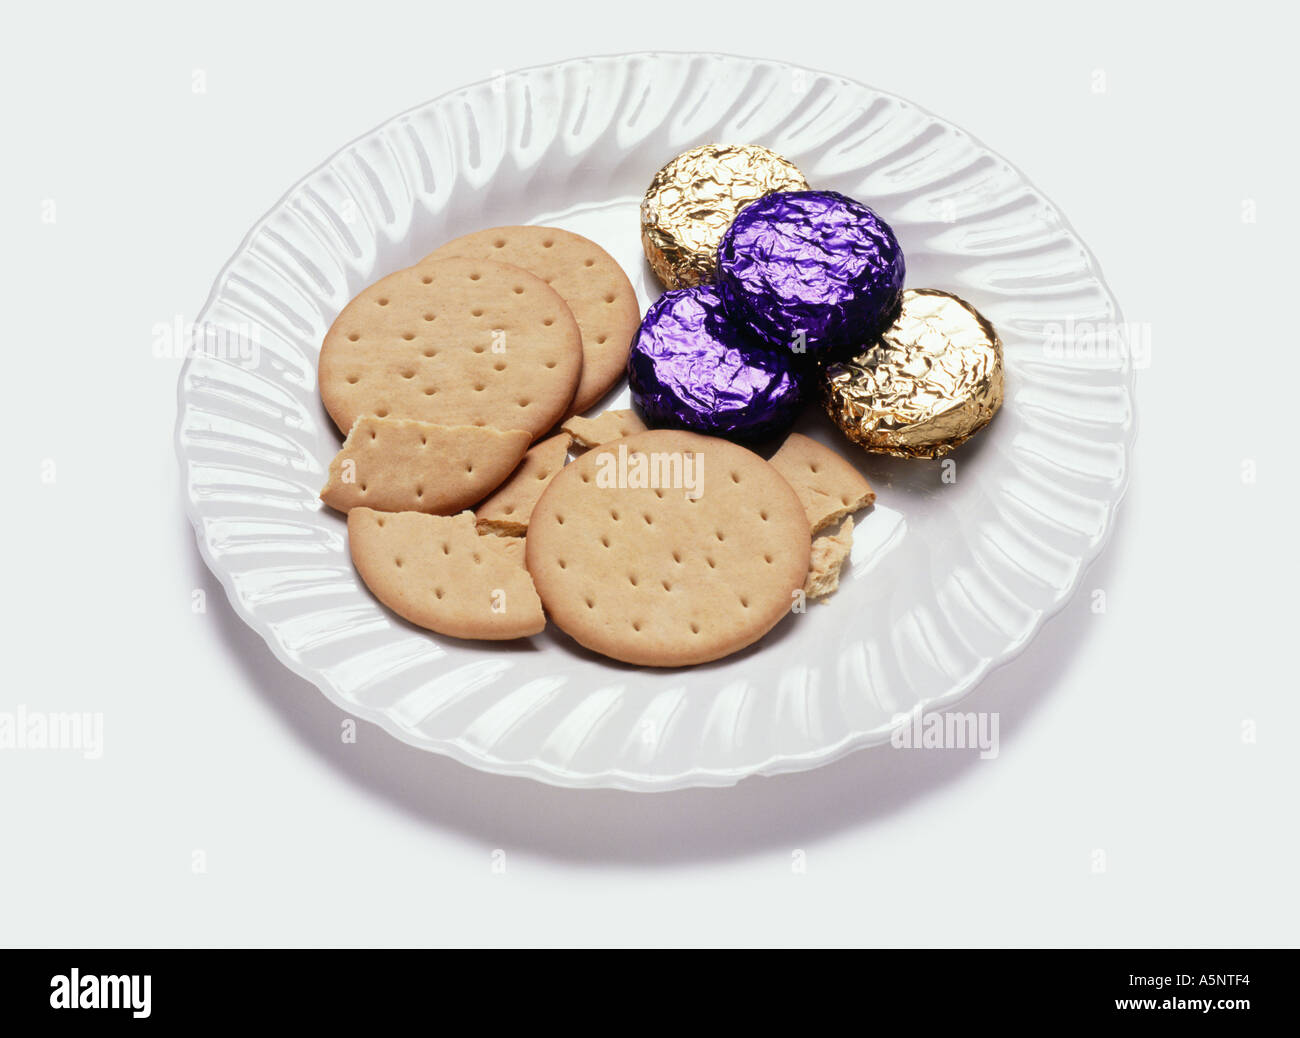 A plate of biscuits Stock Photo